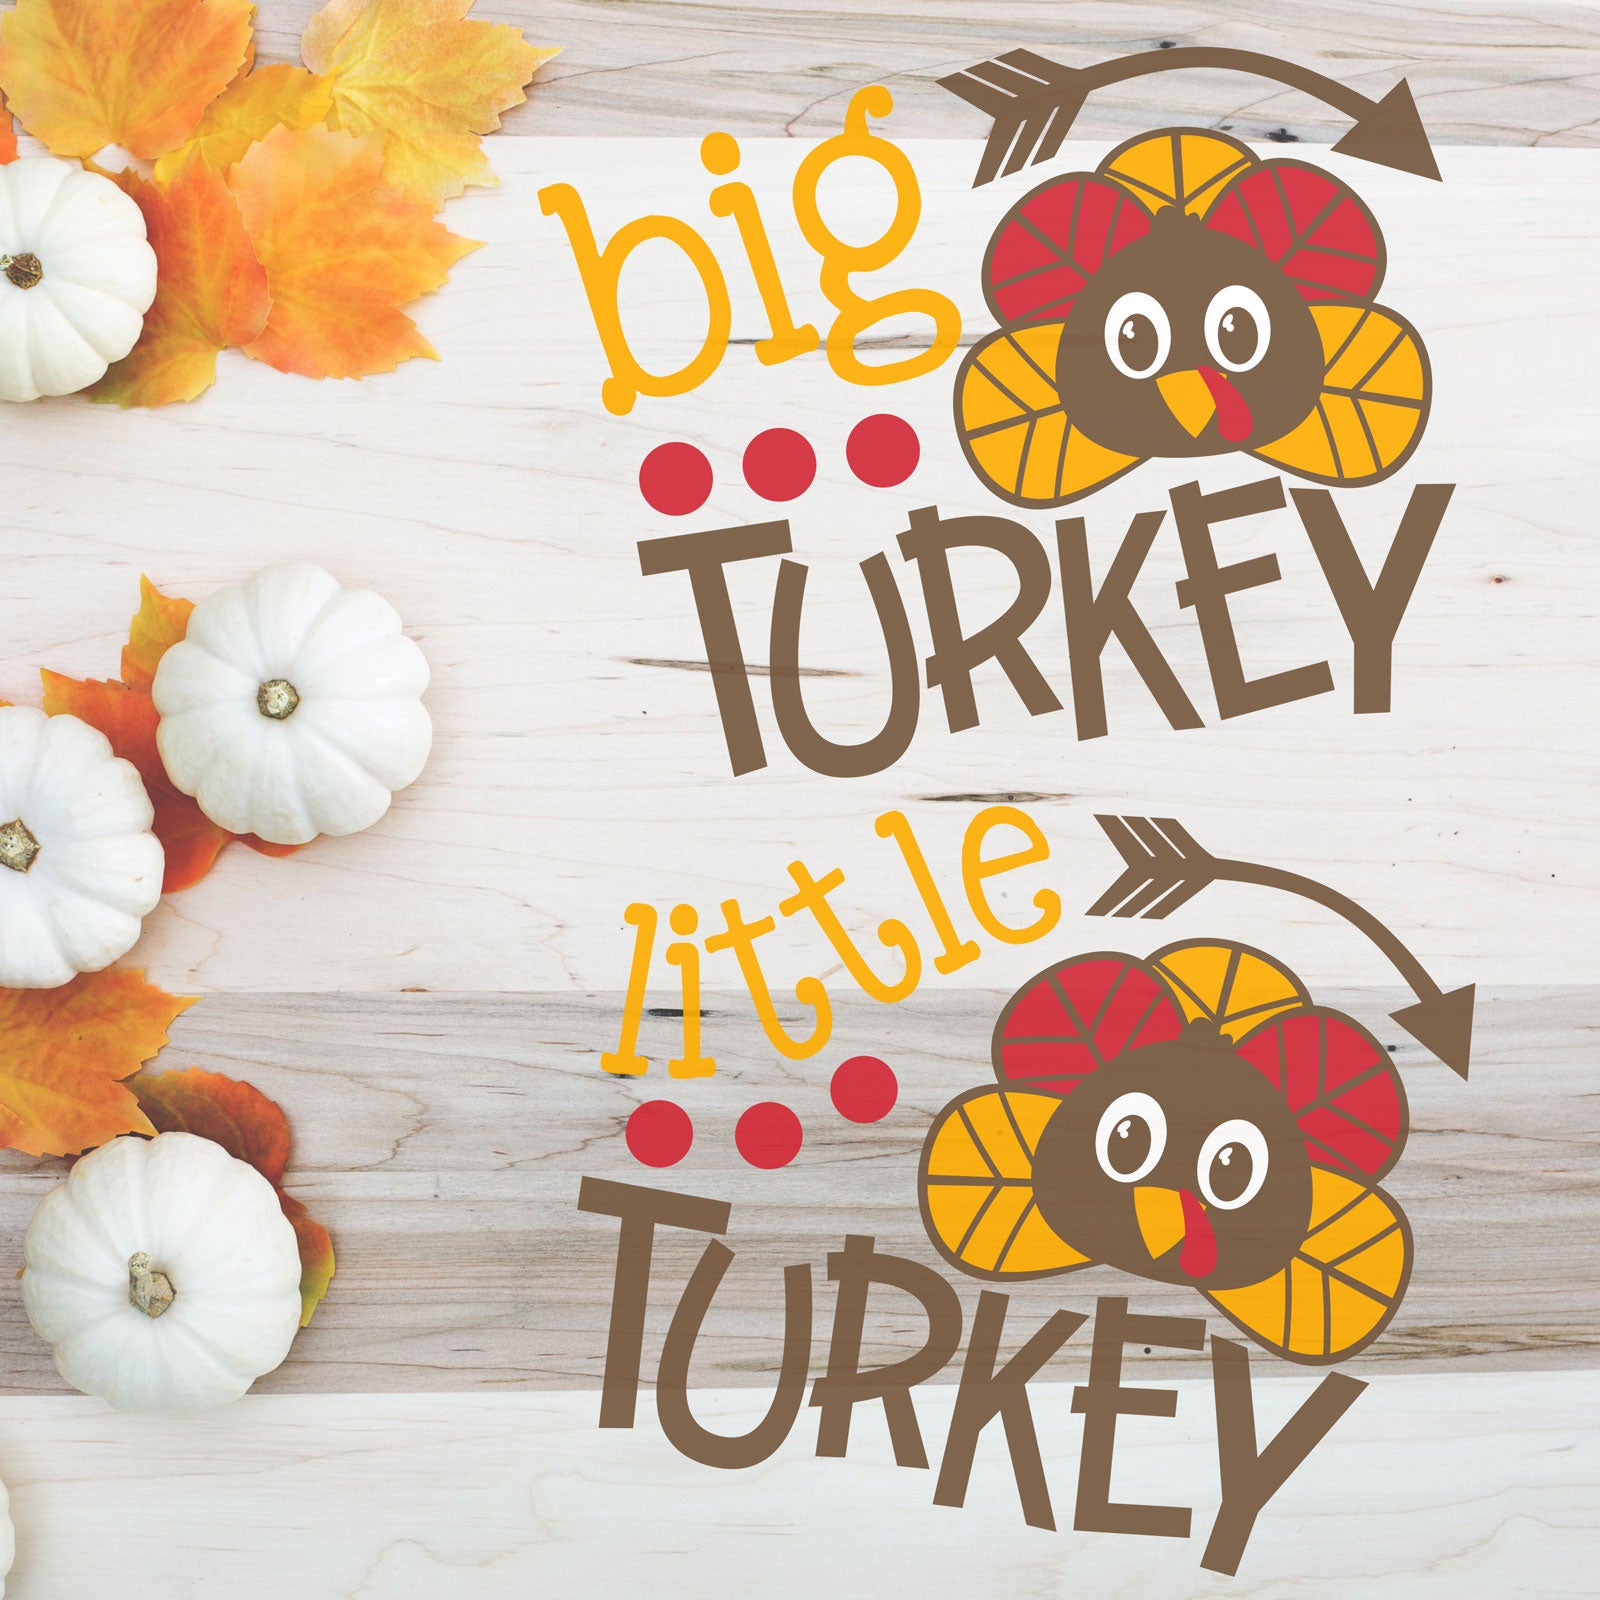 Download Art Collectibles Clip Art Sibling Thanksgiving Design Cut File Clipart Instant Download Svg Dx I M The Middle Turkey Eps Full Color 300 Dpi Jpg Png Baby Turkey